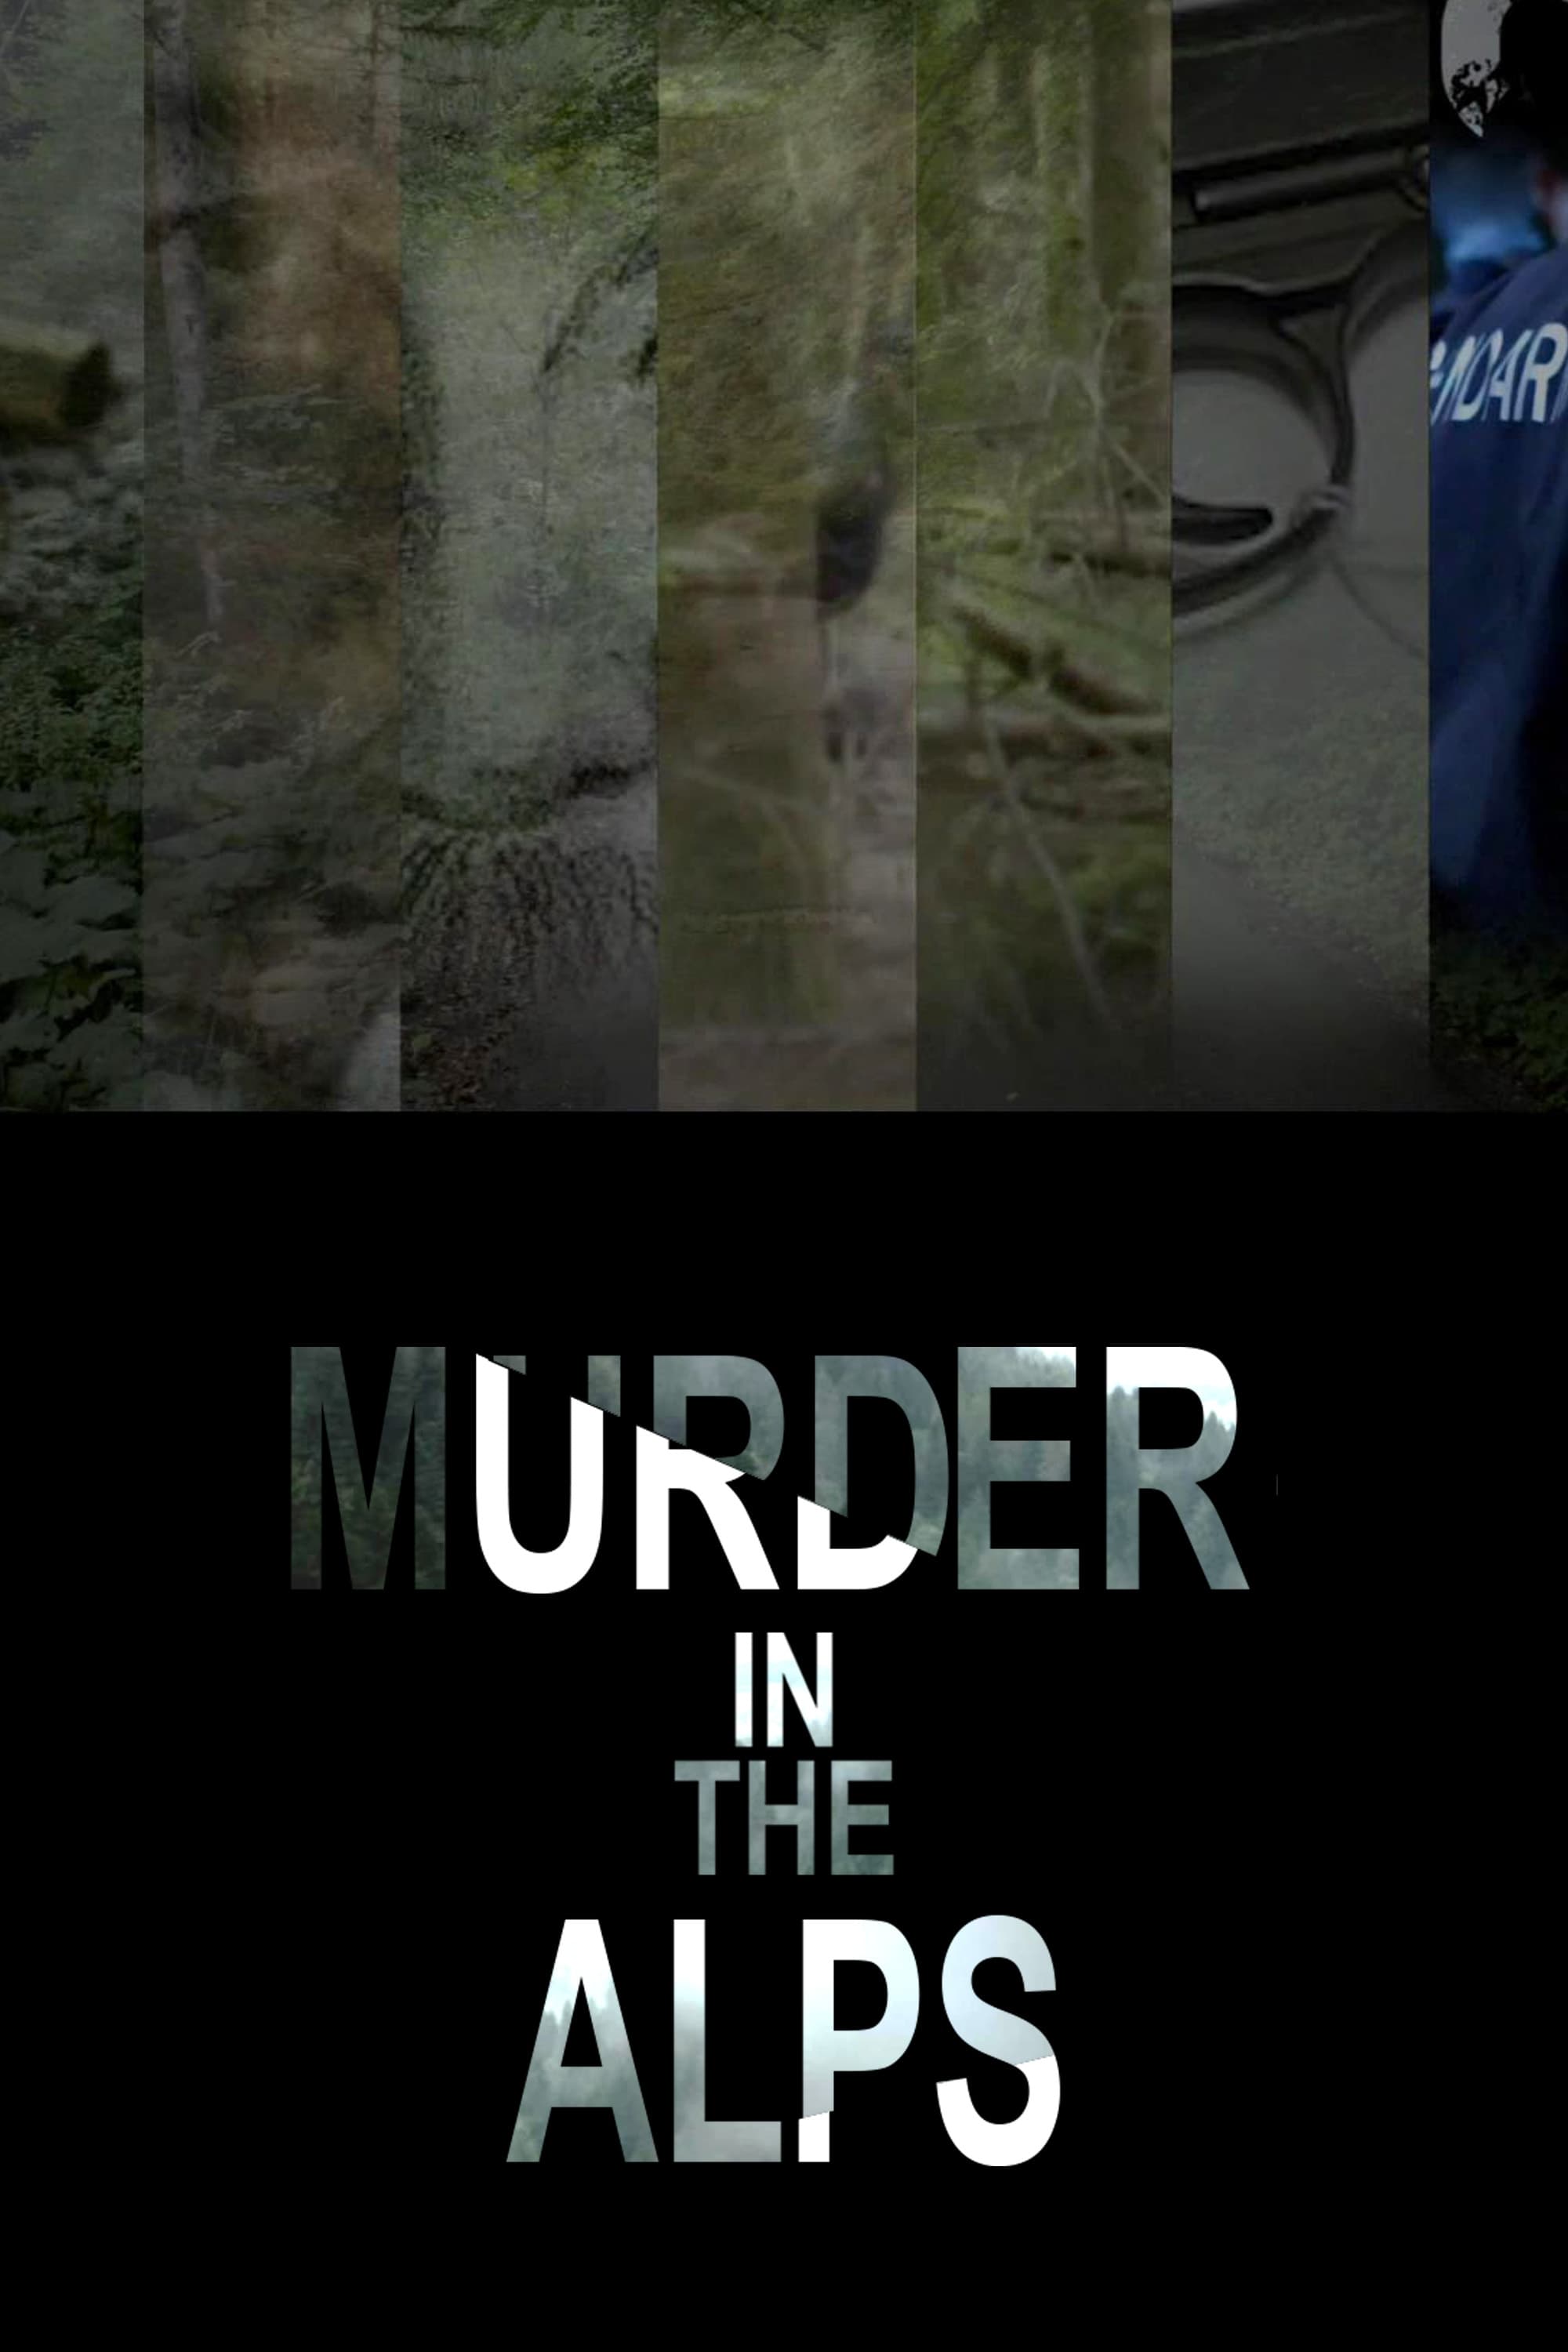 Murder in the Alps TV Shows About Murder